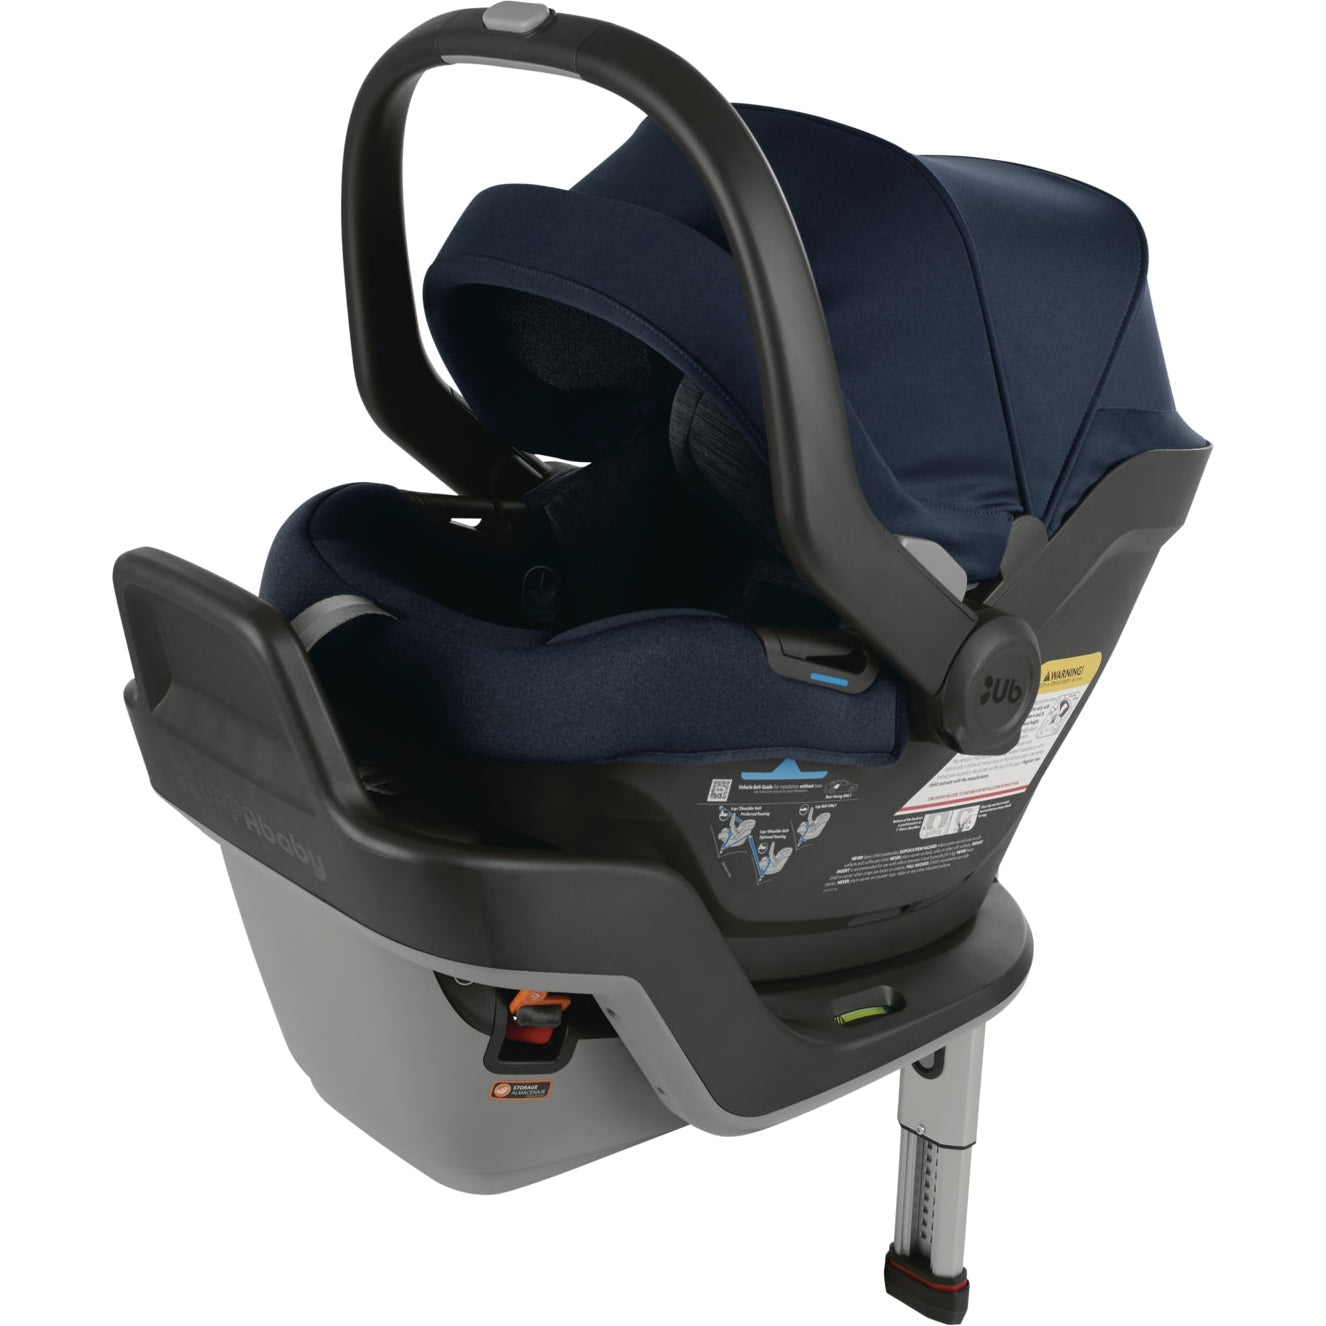 UPPAbaby Mesa Max Infant Car Seat - Twinkle Twinkle Little One